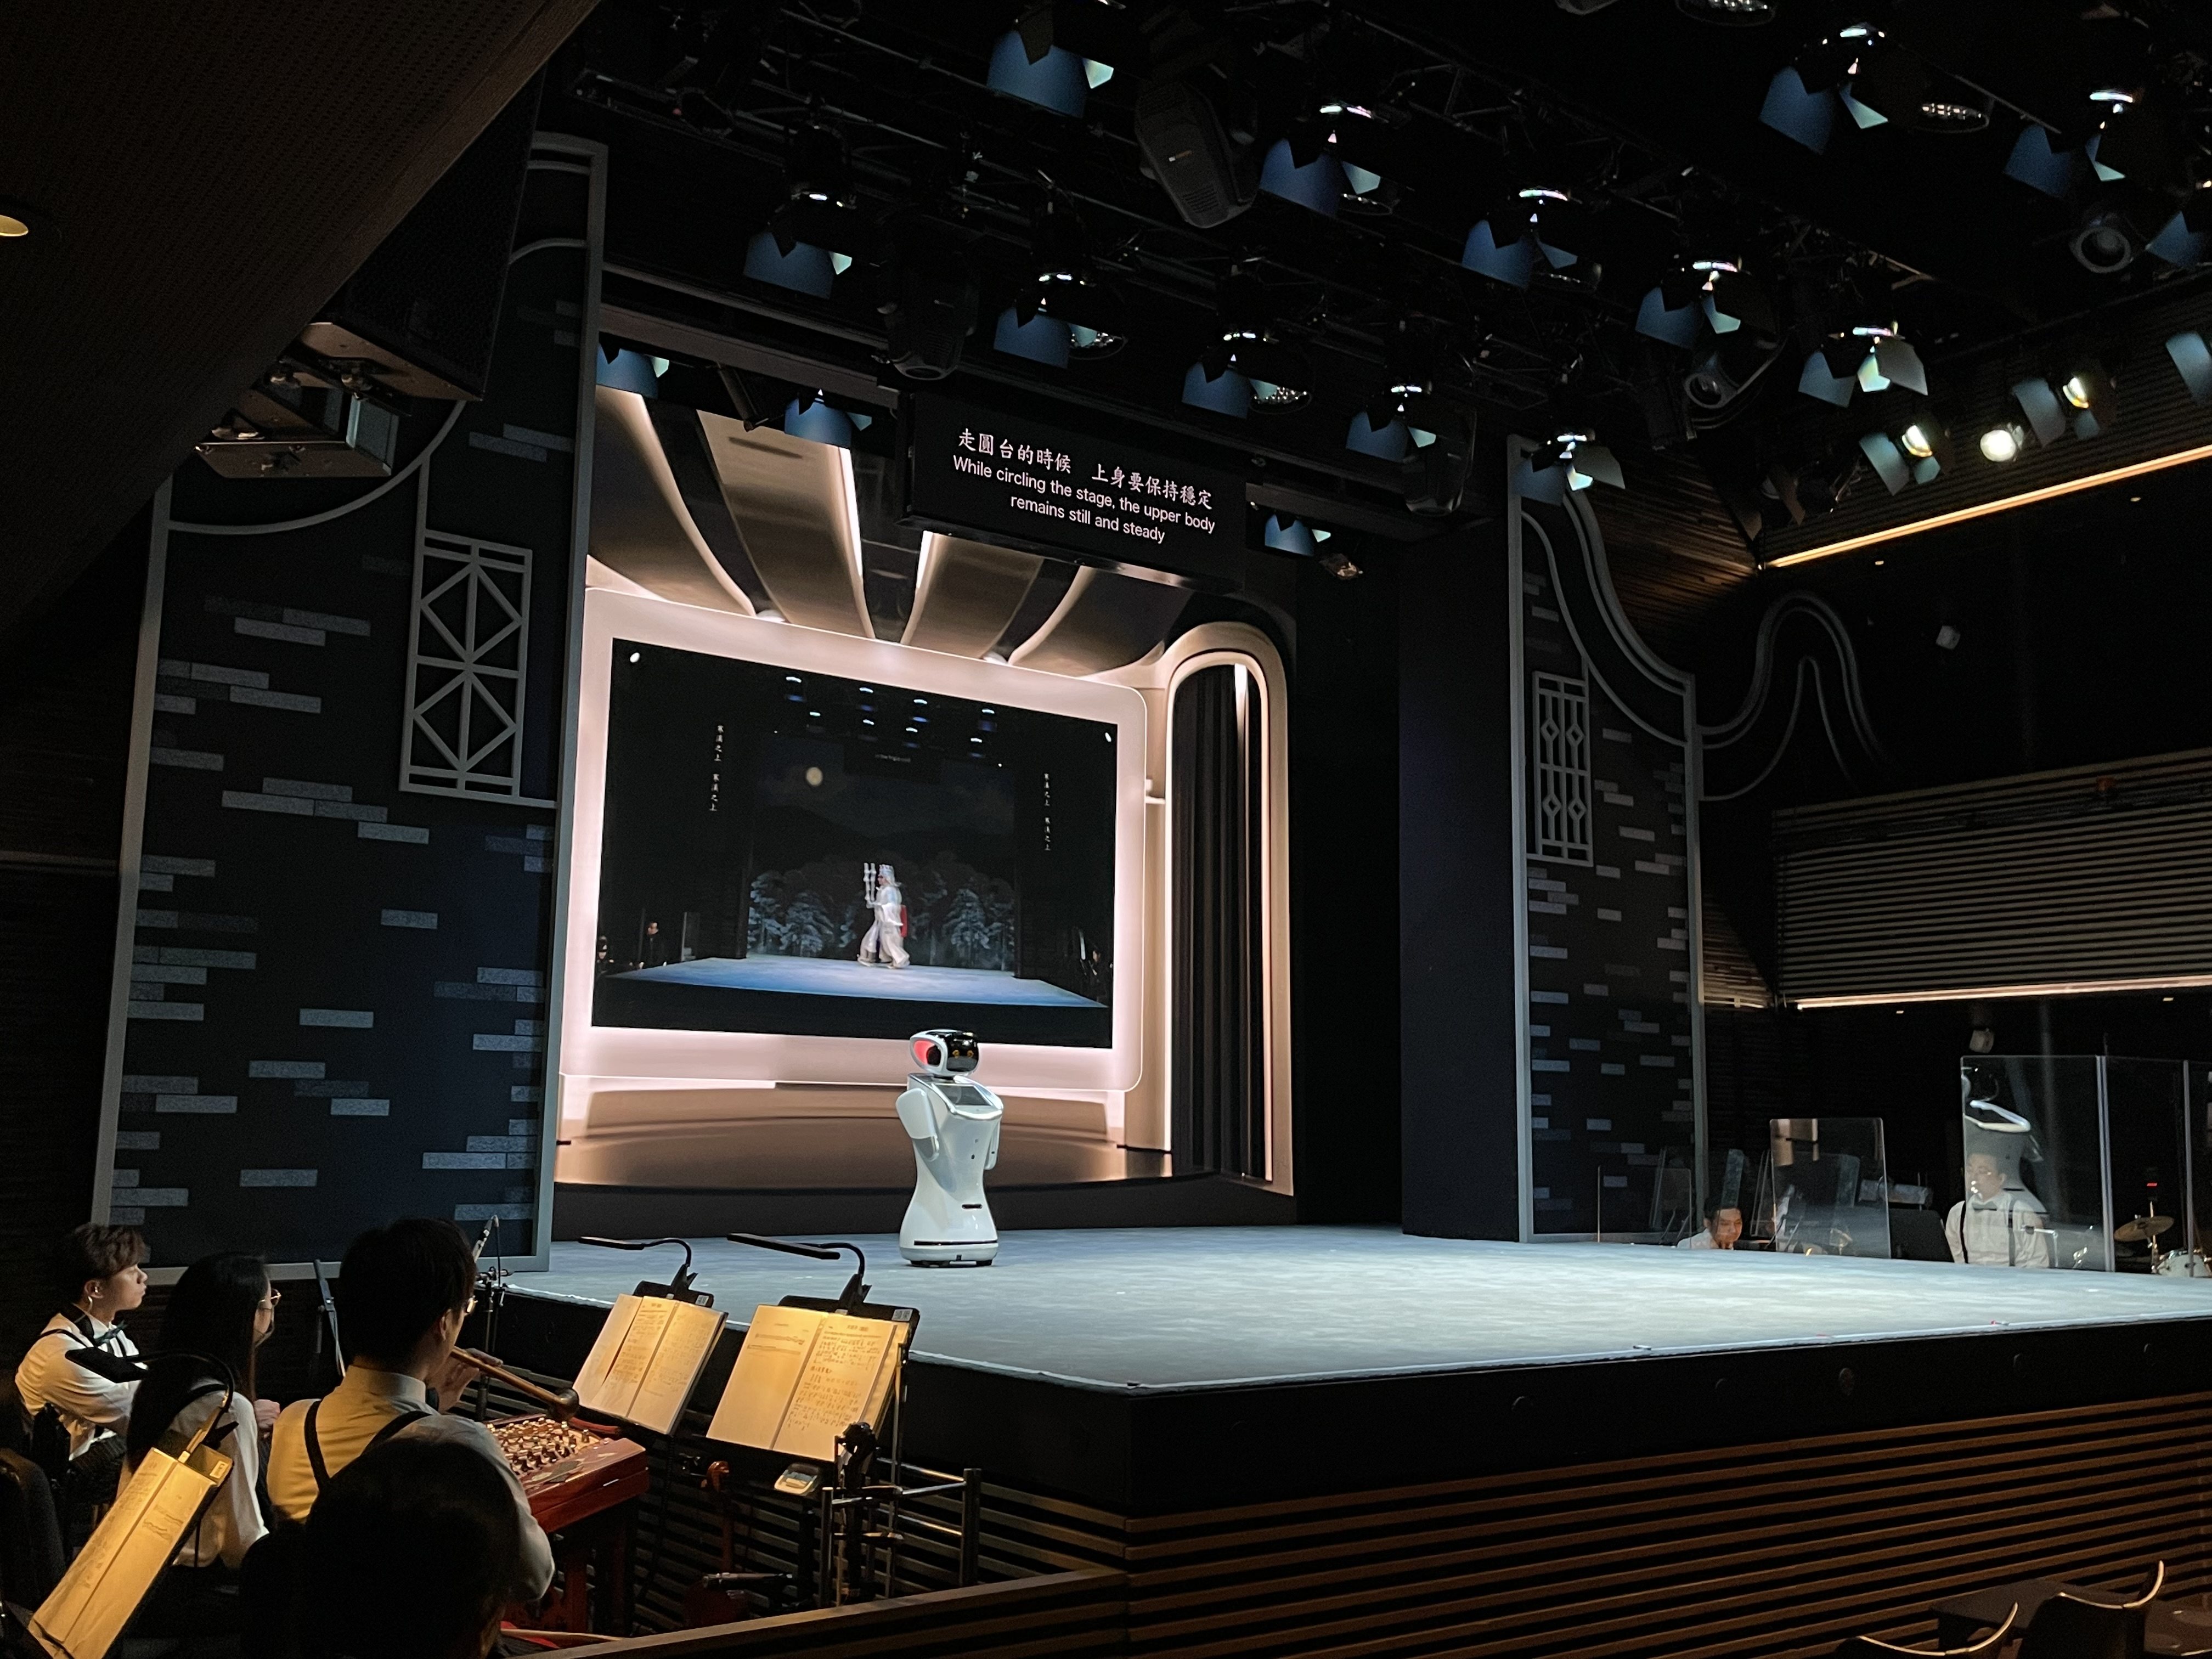 A robot is teaching its human audience about Cantonese opera. Photo: Charlotte Kwan